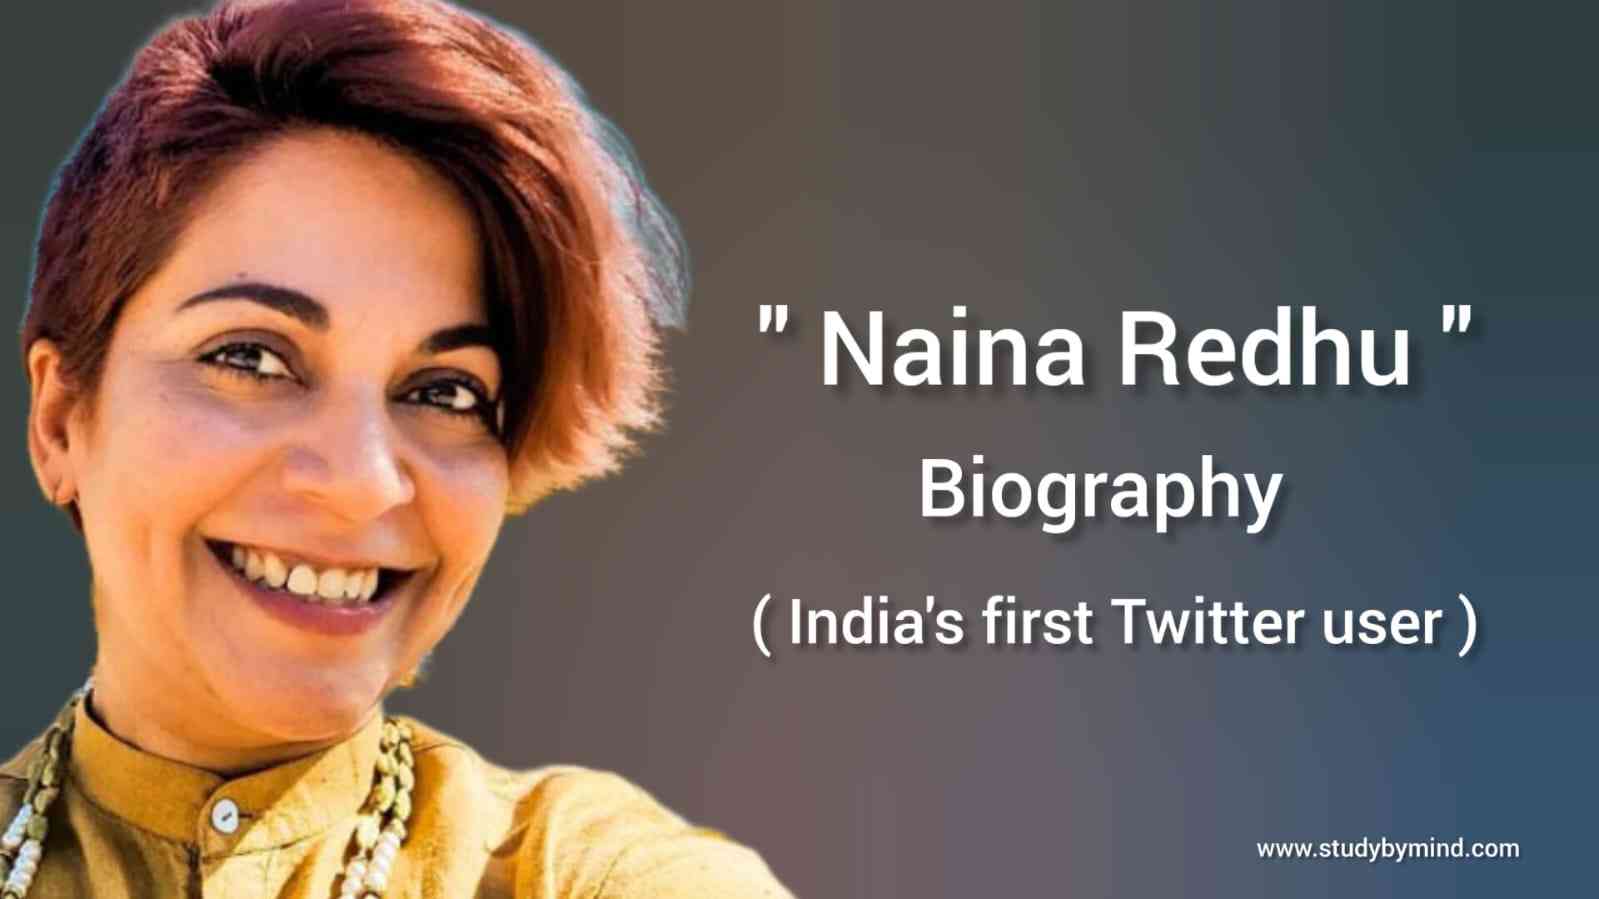 You are currently viewing Naina Redhu biography in english (India’s first Twitter user)